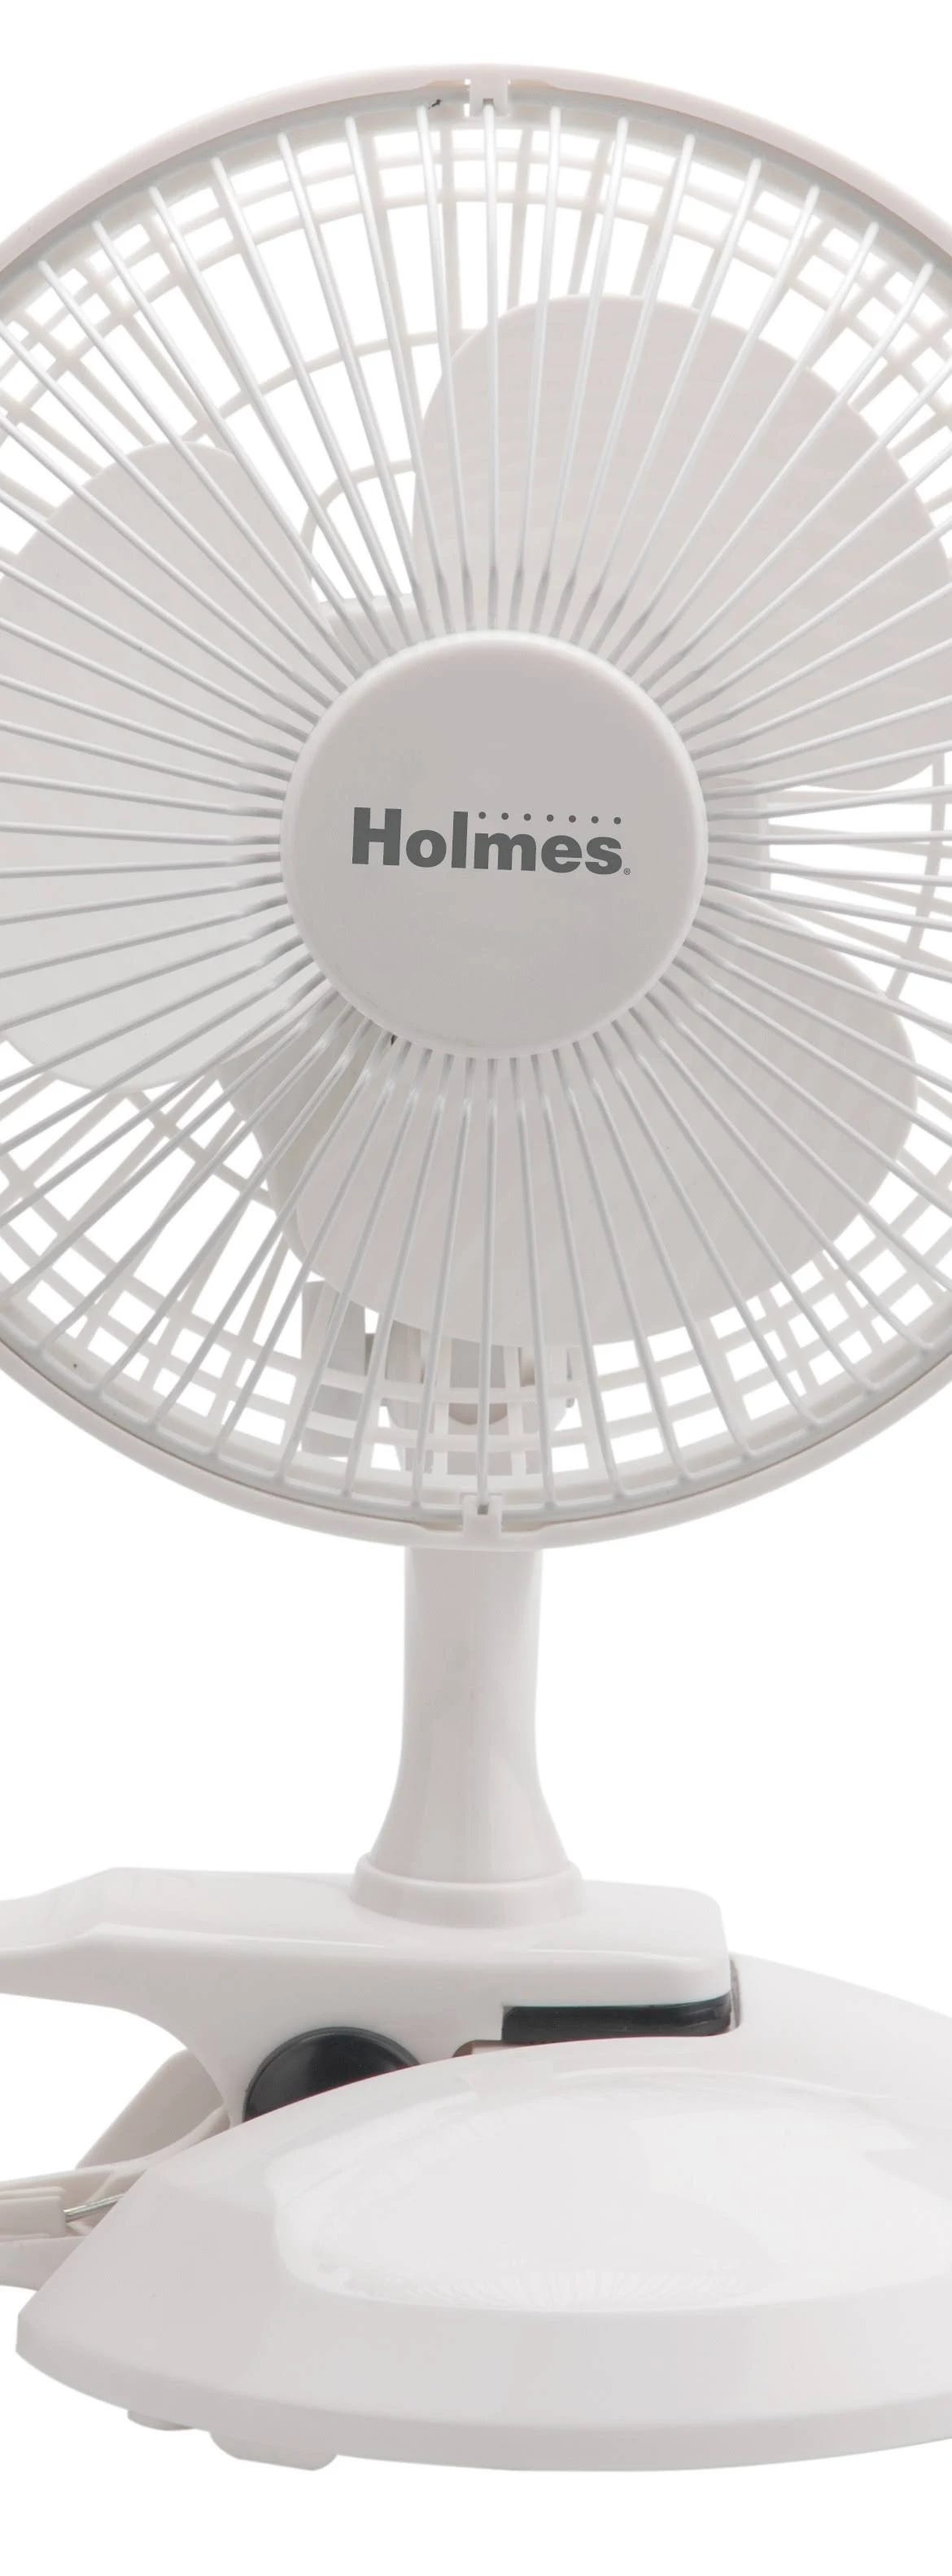 Holmes Convertible Table Fan with Adjustable Tilt | Image